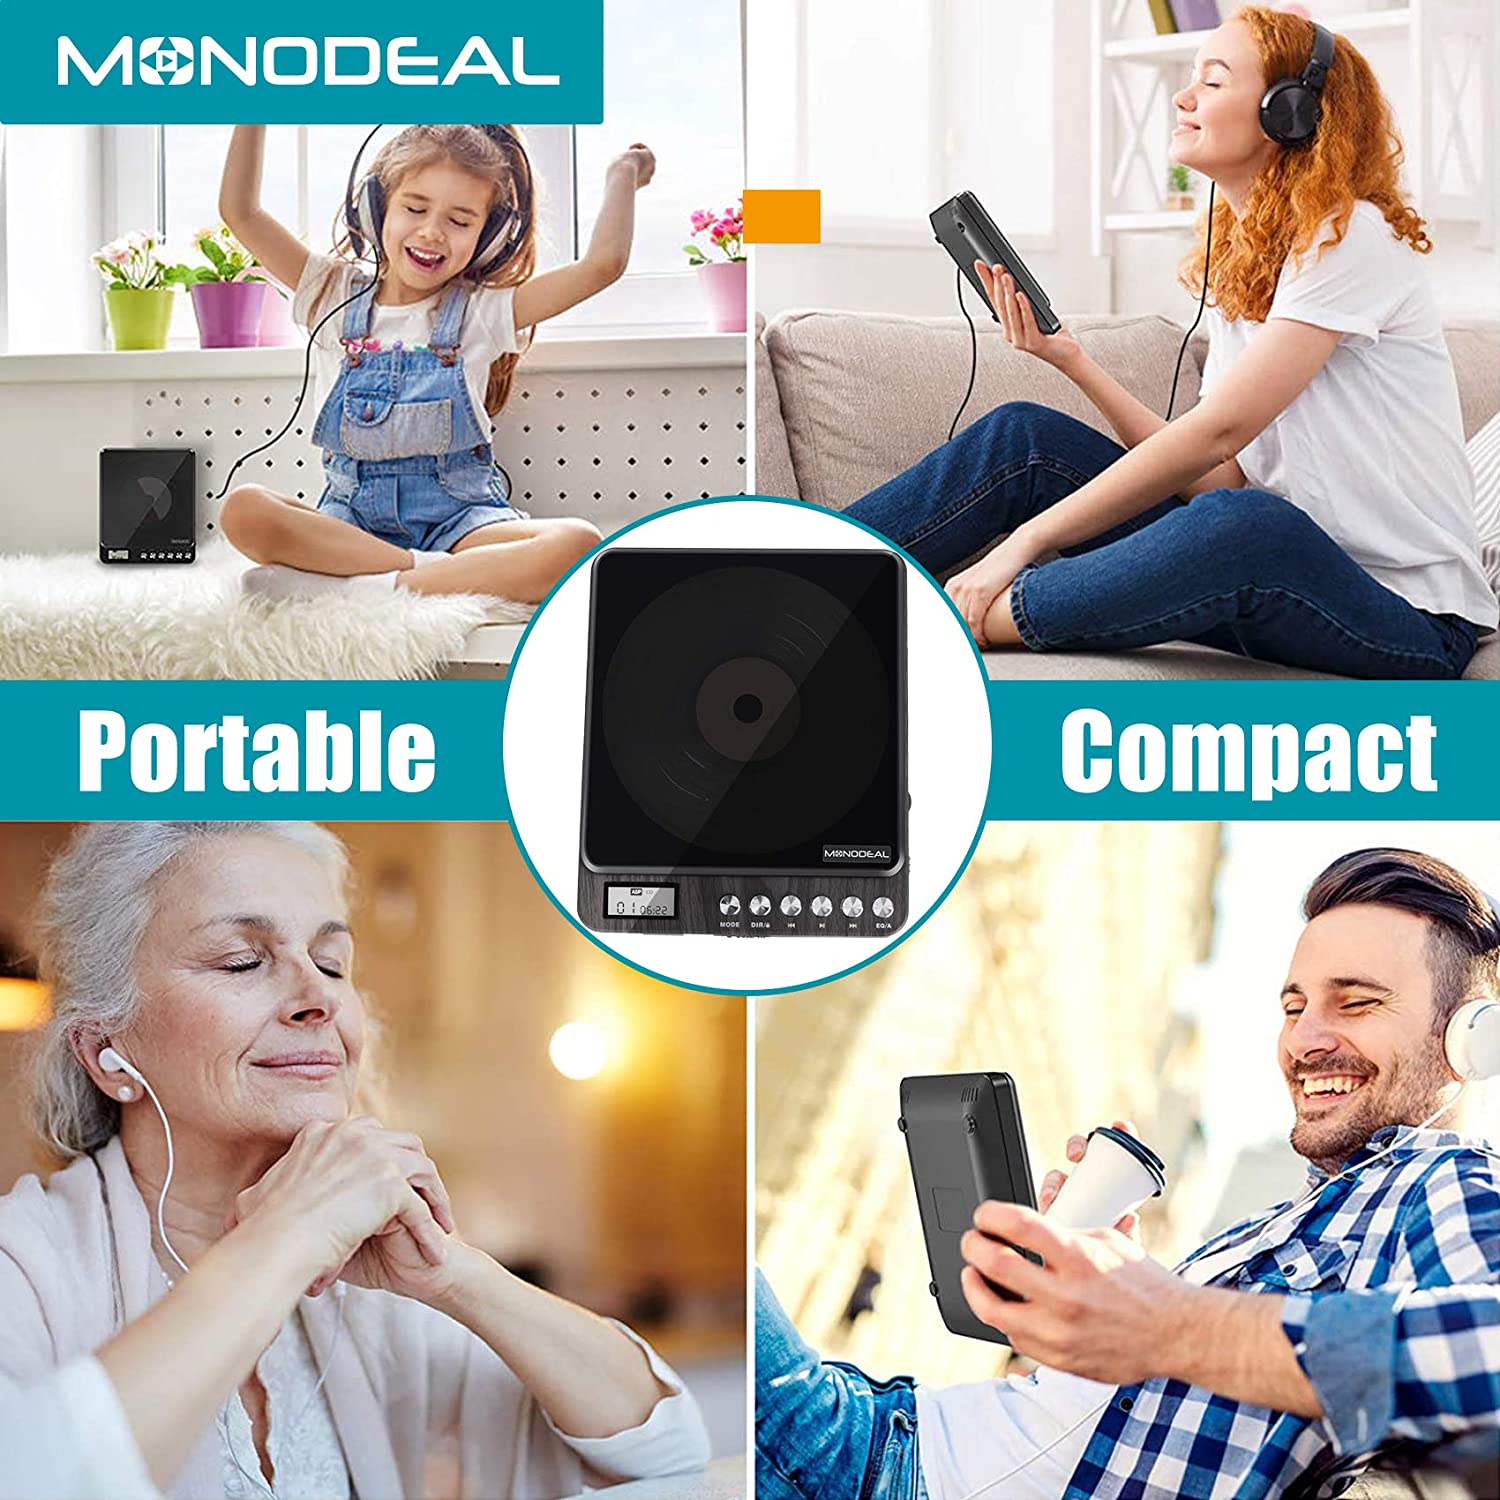  Portable CD Player with Headphones, Monodeal CW605